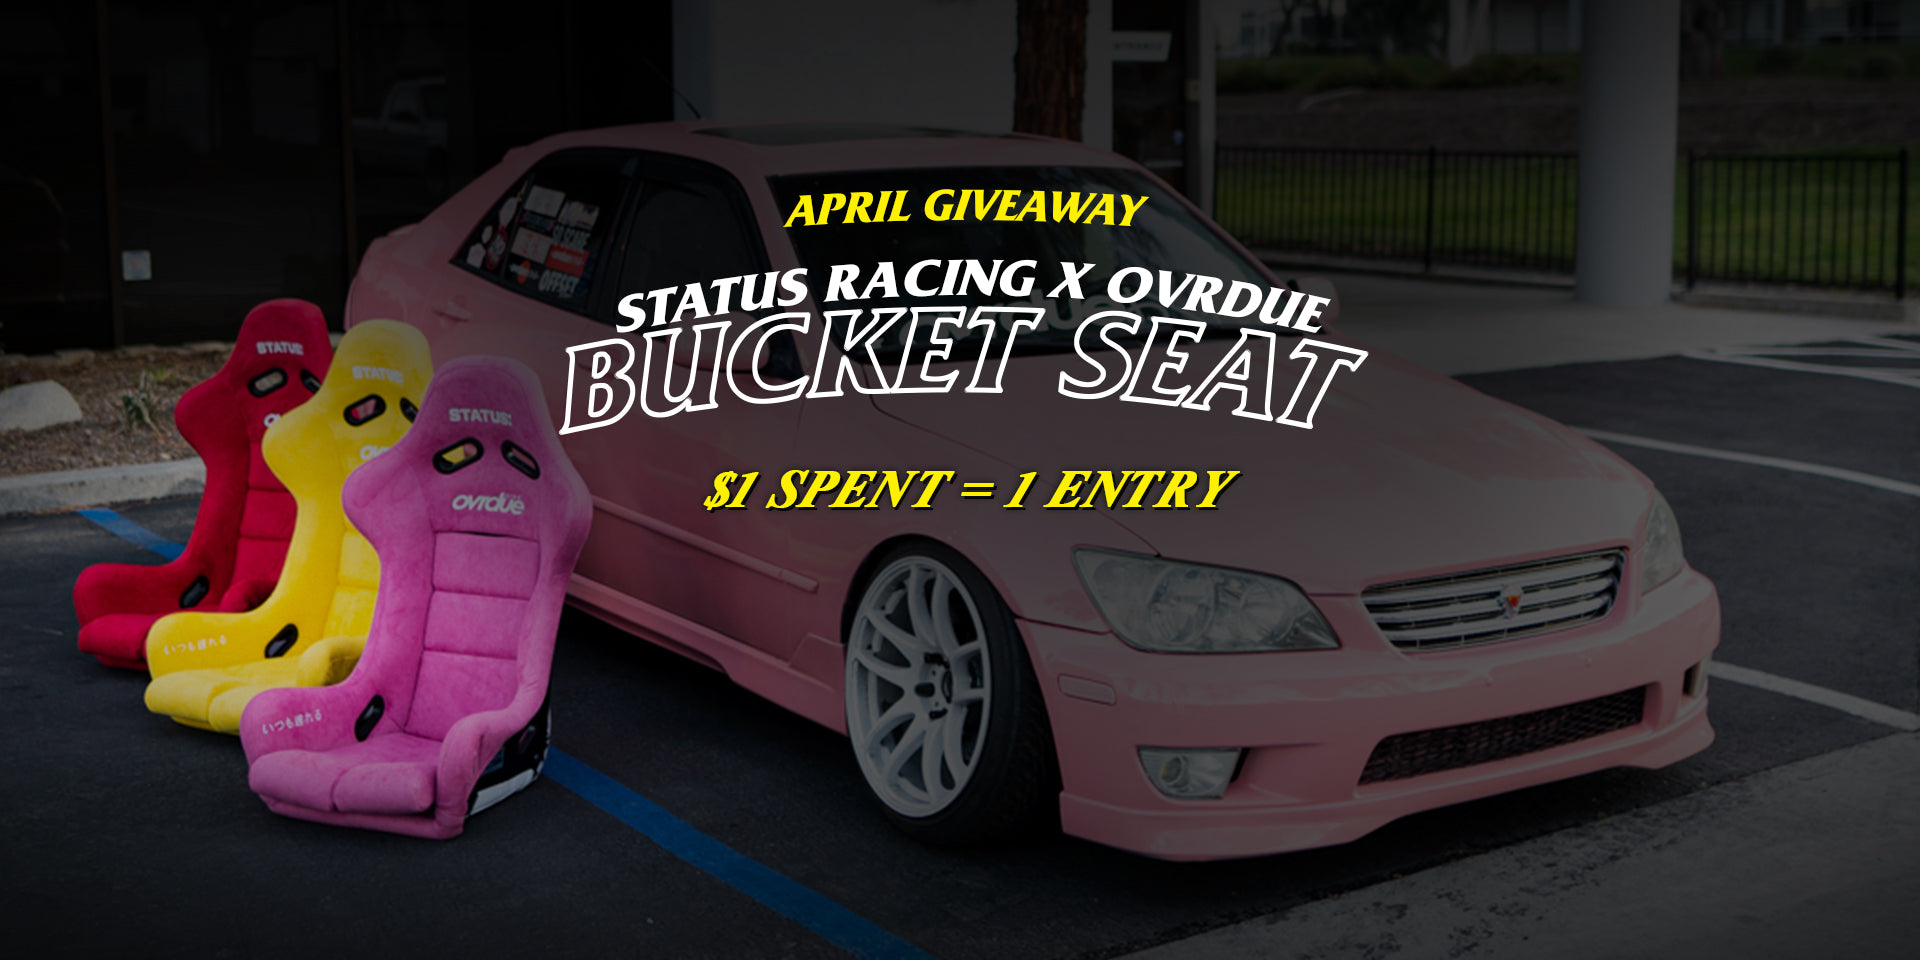 Bucket Seat Giveaway! Every $1 = 1 entry for a chance to win a GT-X seat color of your choice!